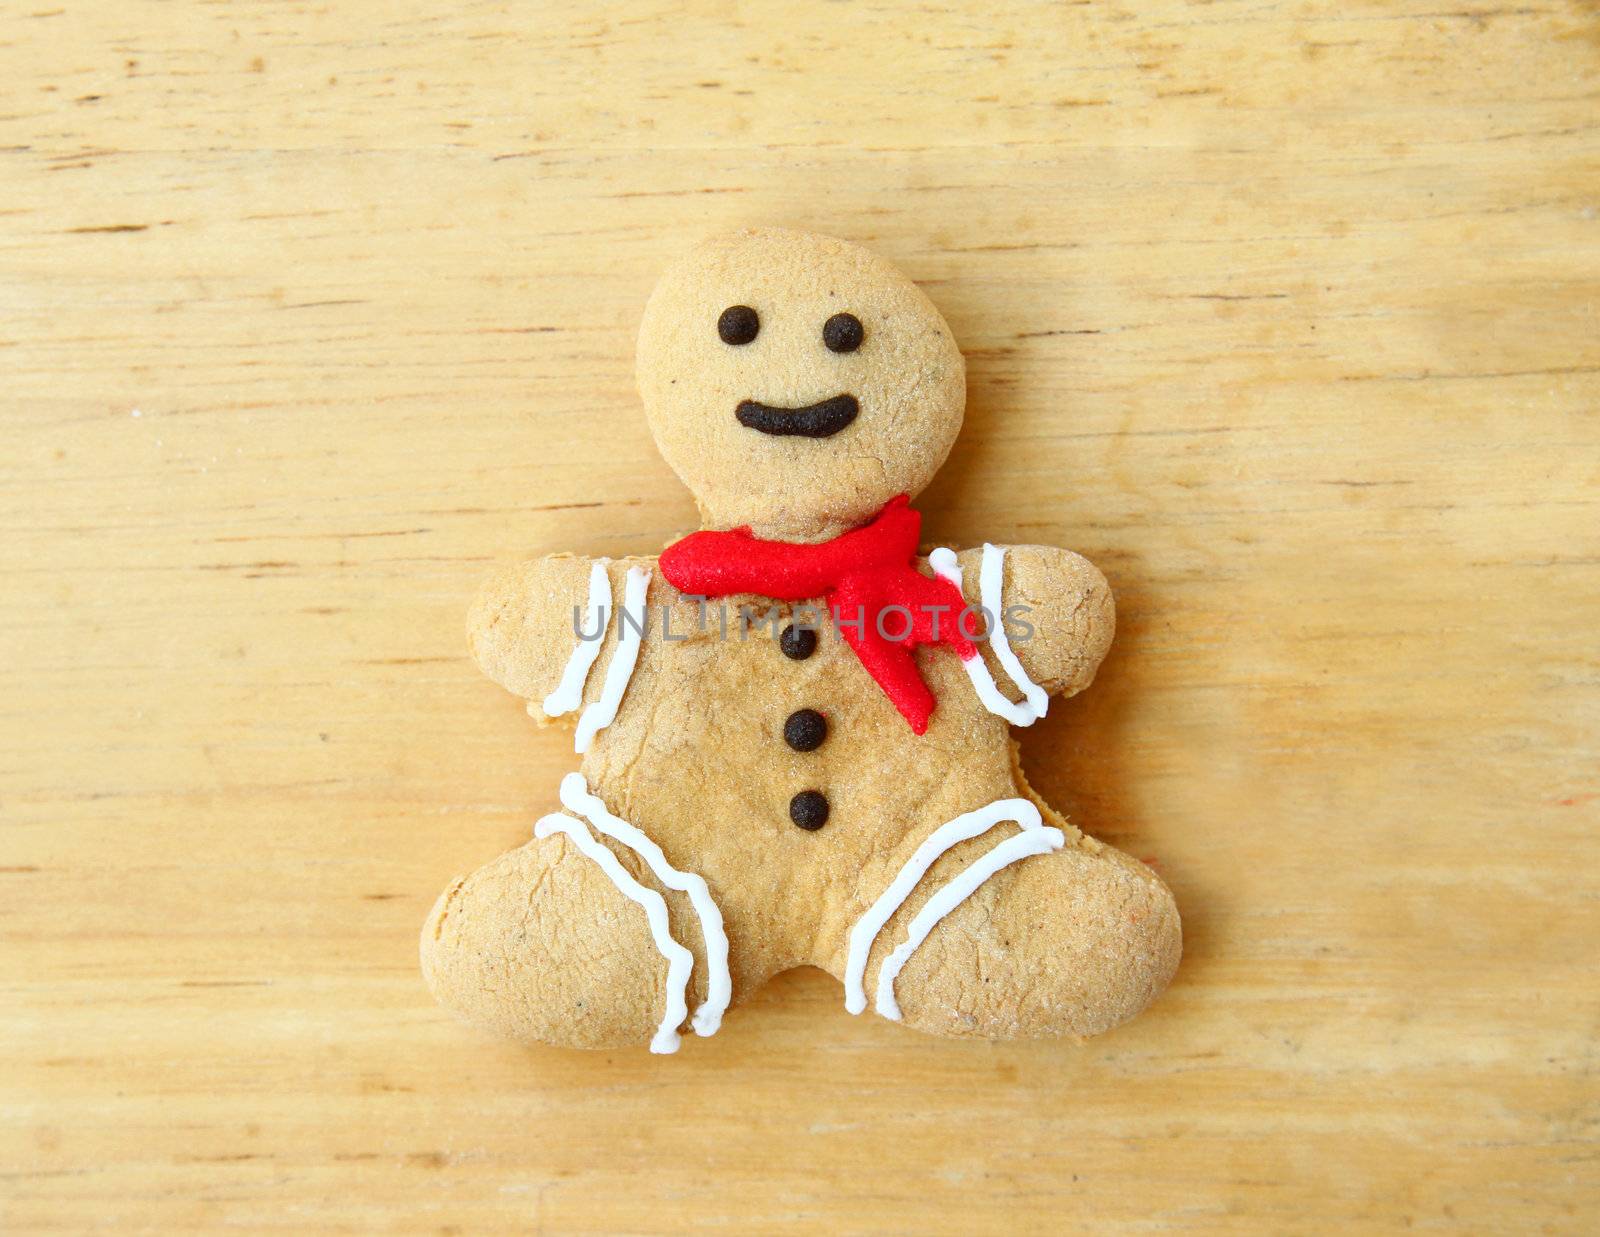 Gingerbread man on wooden background